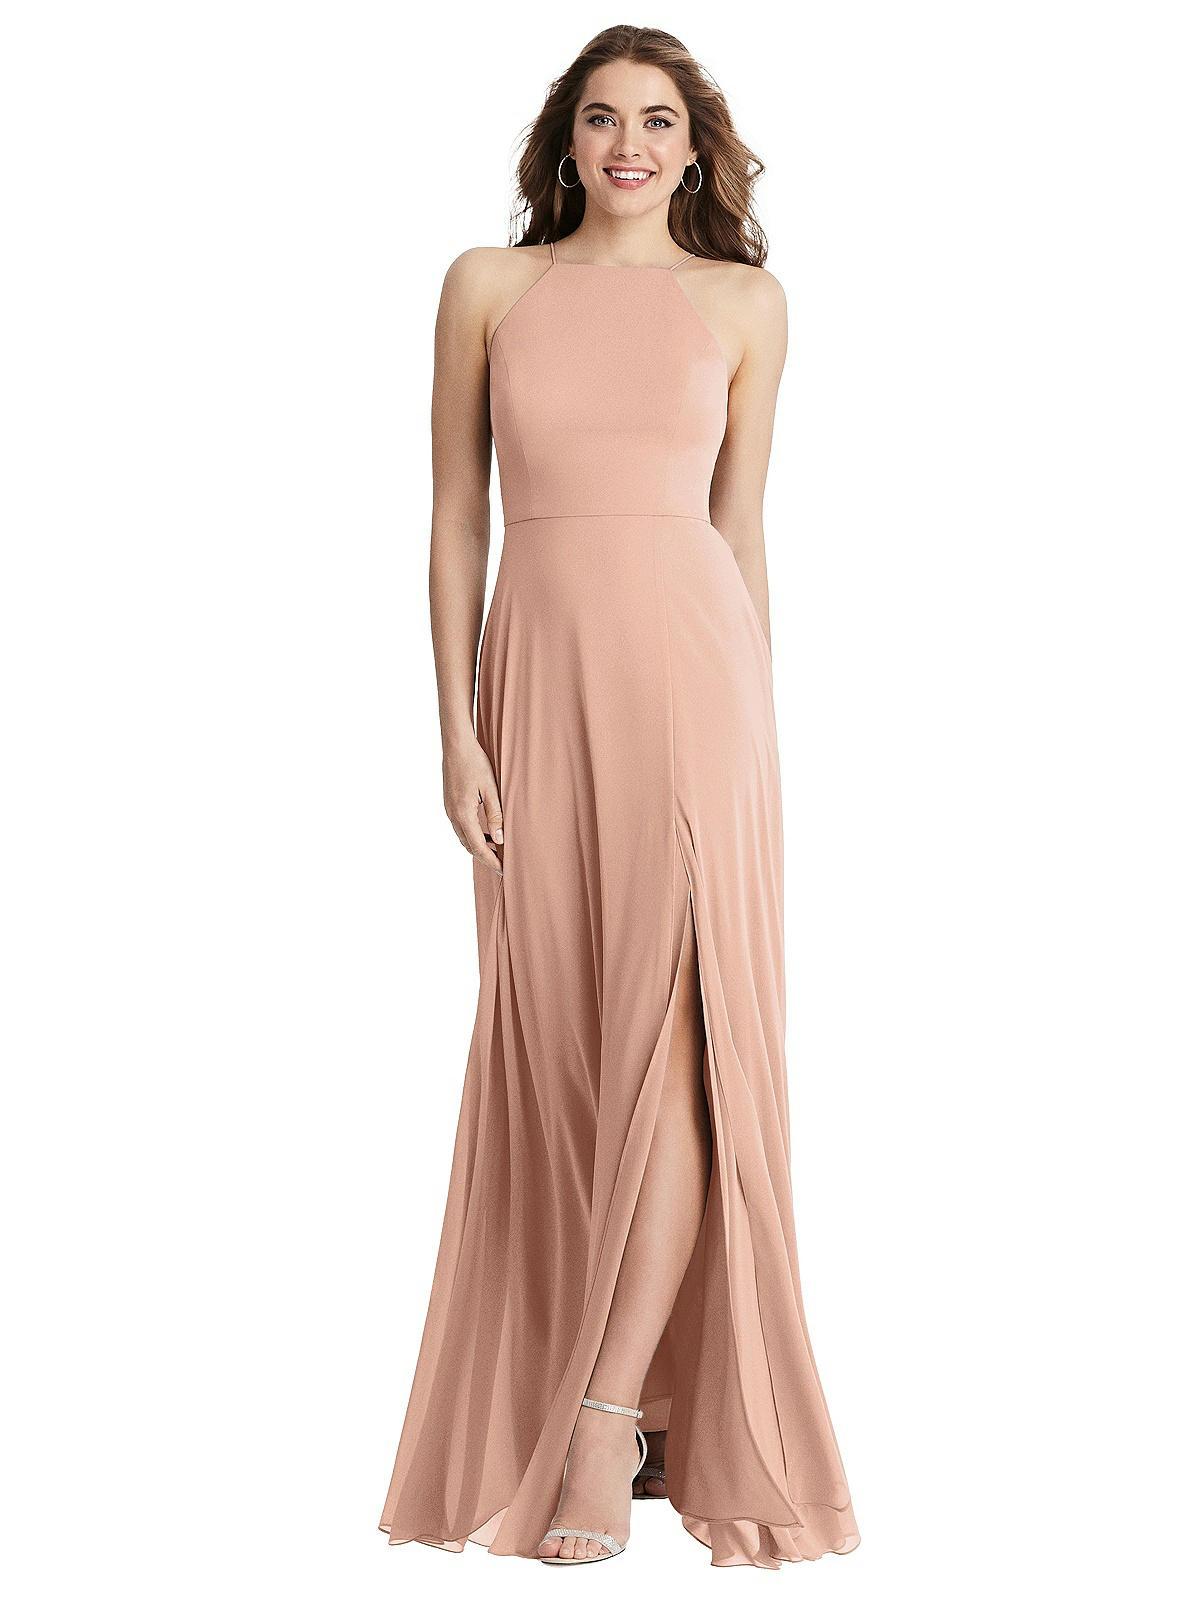 Special Order High Neck Chiffon Maxi Dress with Front Slit - Lela